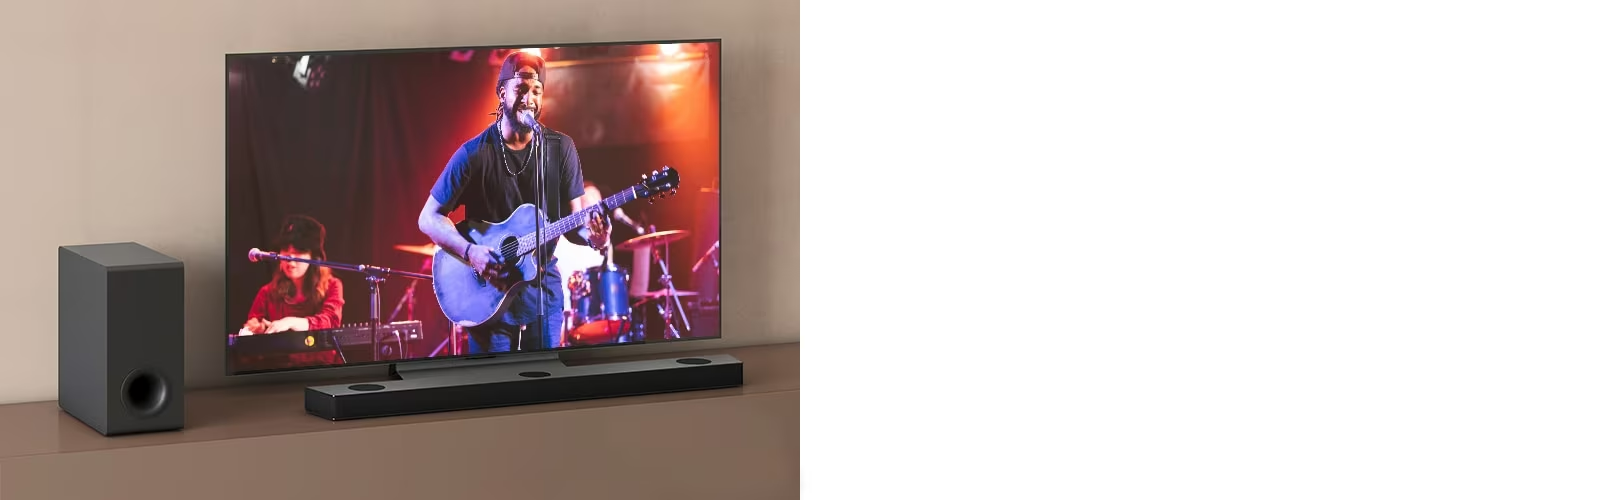 LG TV shows a concert, and LG Sound Bar is placed below LG TV. On the left, sub-woofer is on the brown shelf.